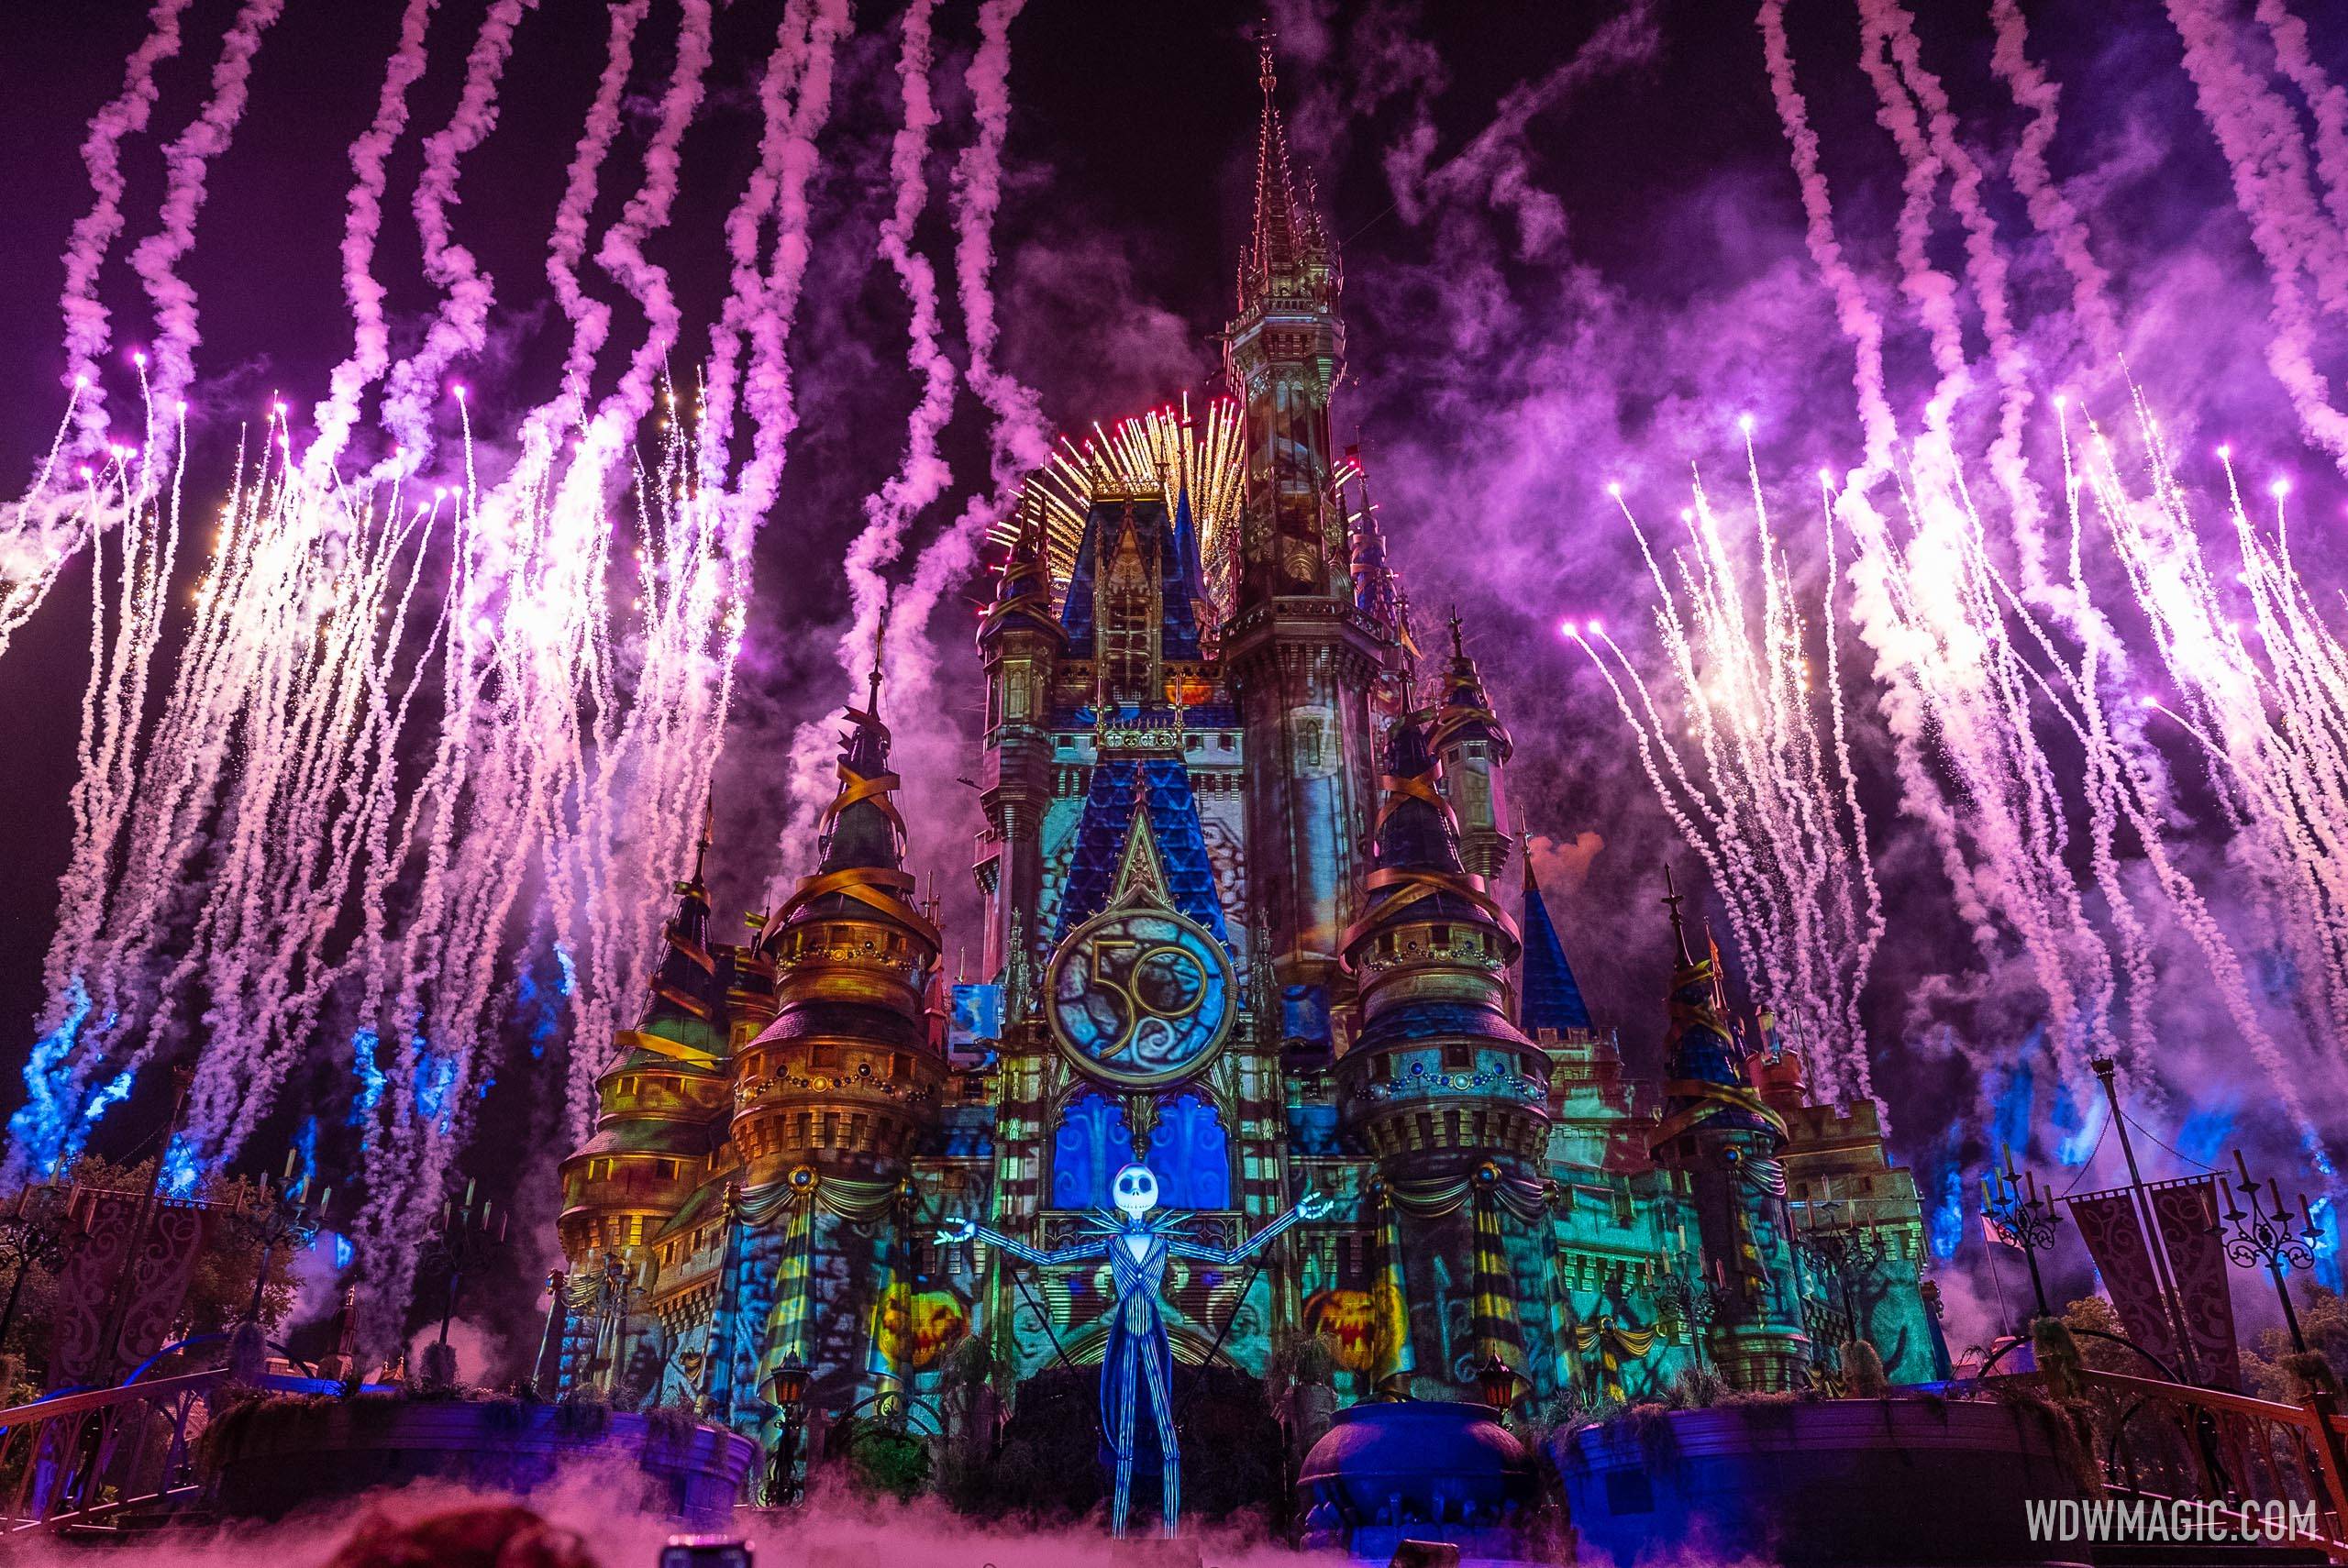 Disney World's Mickey's Not-So-Scary Halloween Party continues to sell out dates at a rapid pace